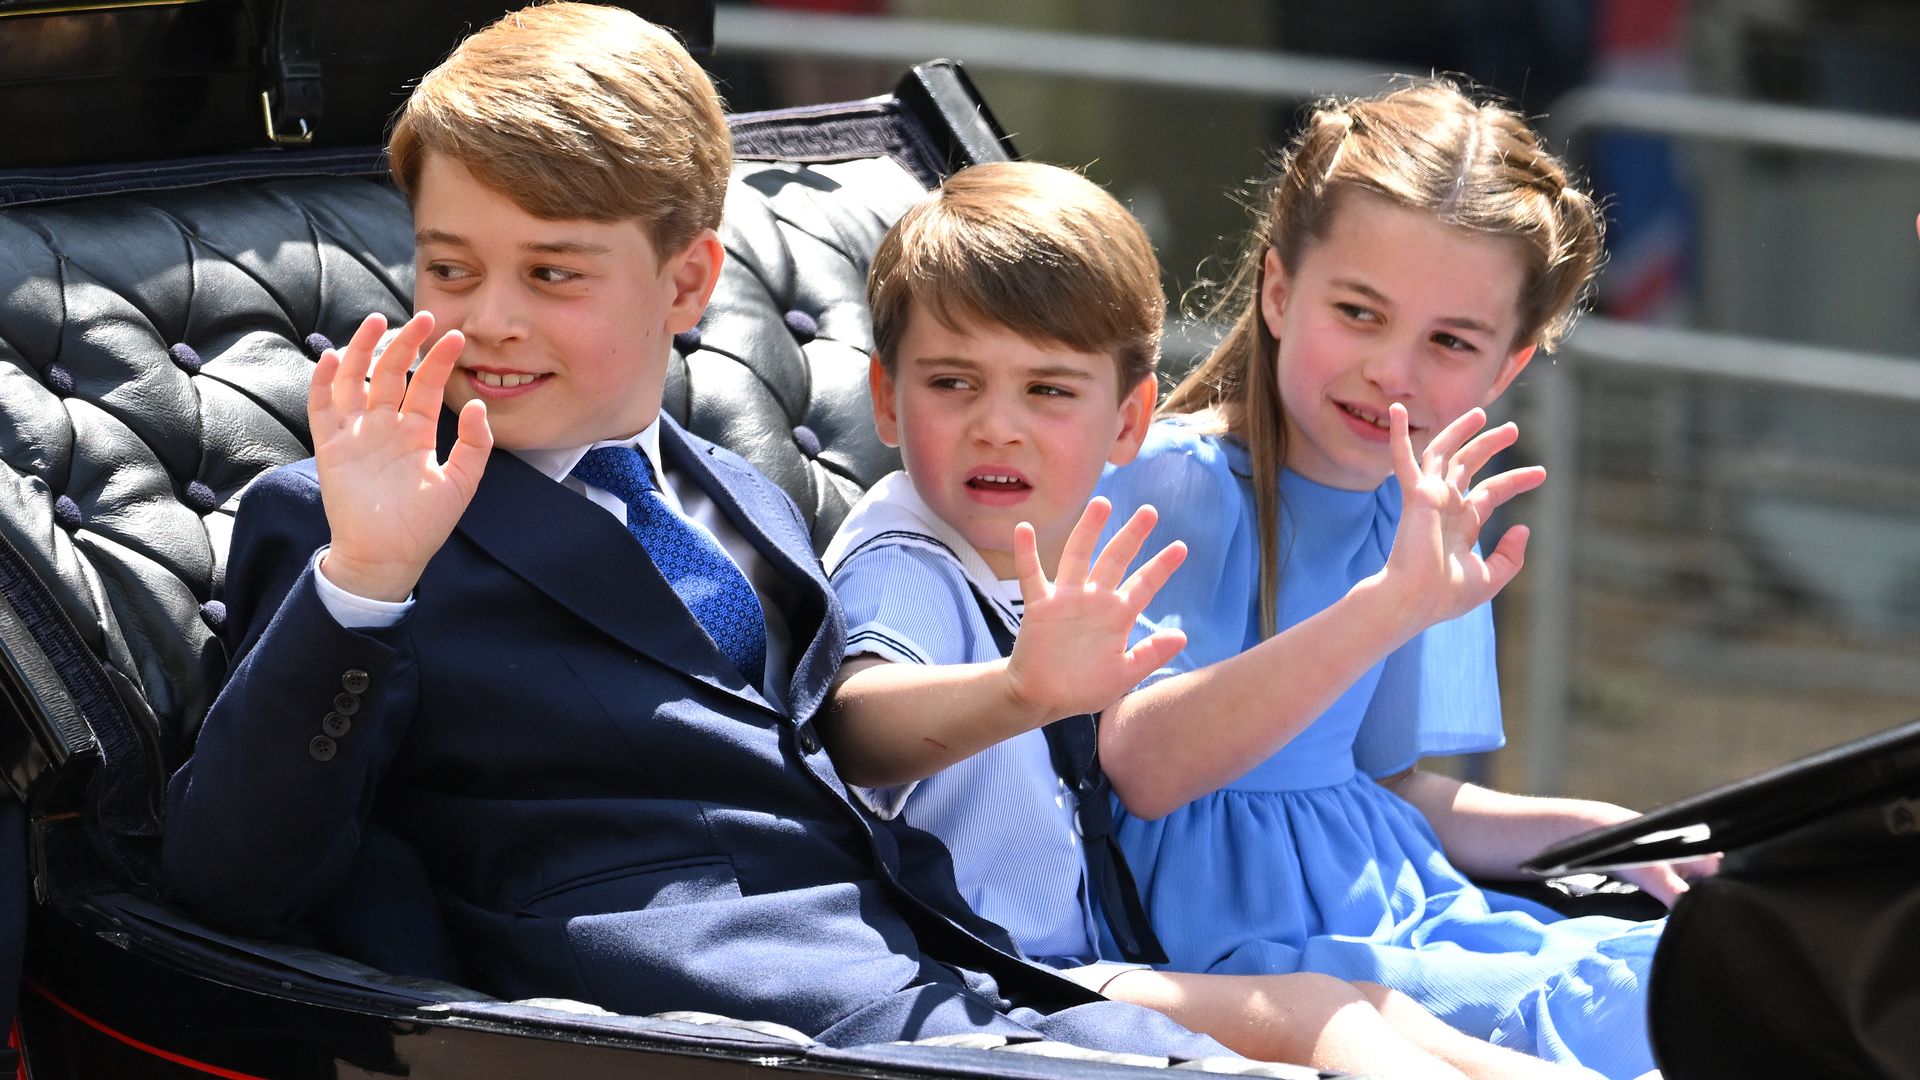 Prince George, Prince Louis and Princess Charlotte in the carriage procession at Trooping the Colour during Queen Elizabeth II Platinum Jubilee on June 02, 2022 in London, England.